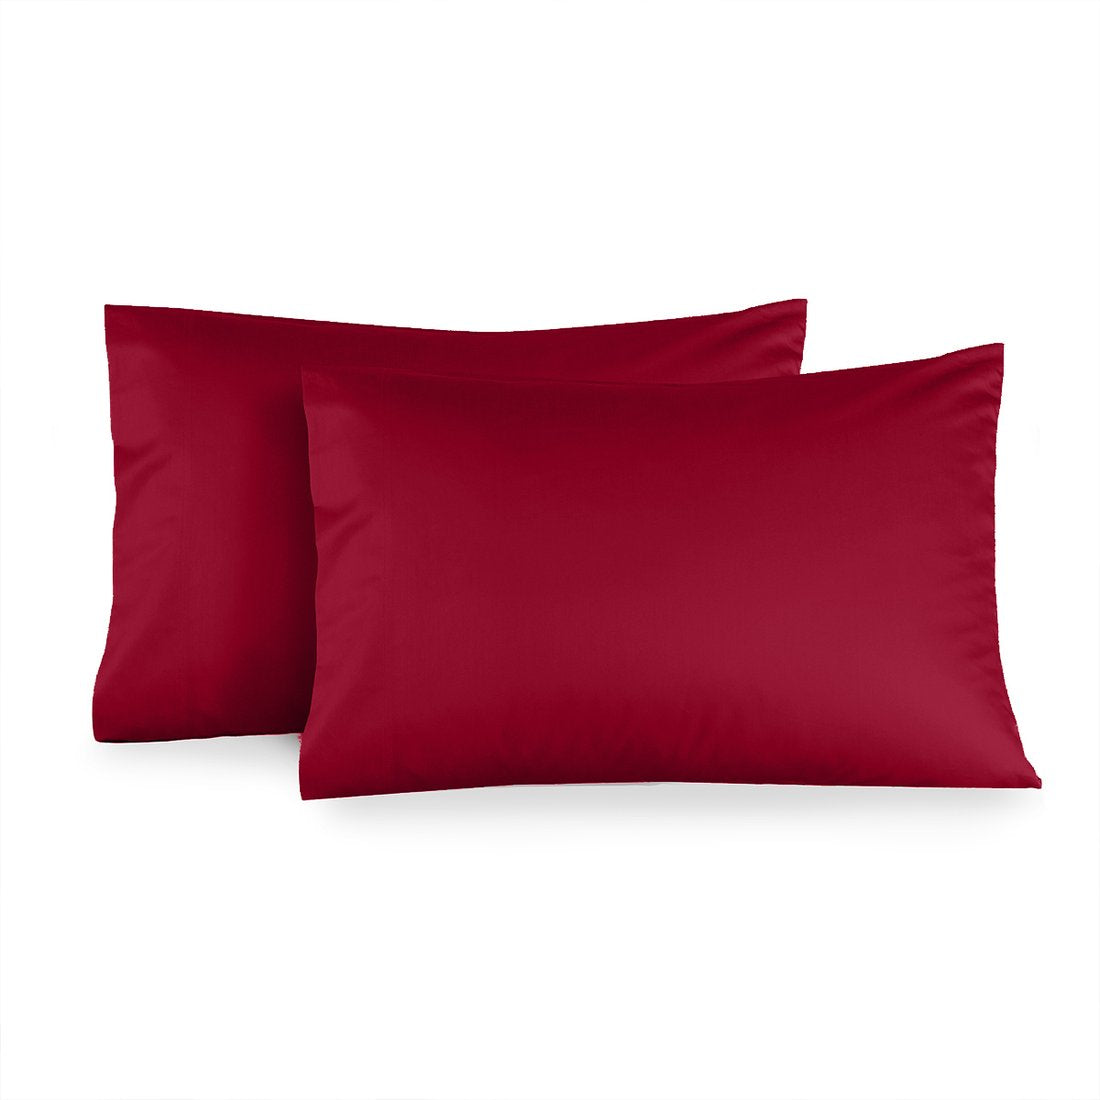 Solid 600 Thread Count Pillowcases (Pair)